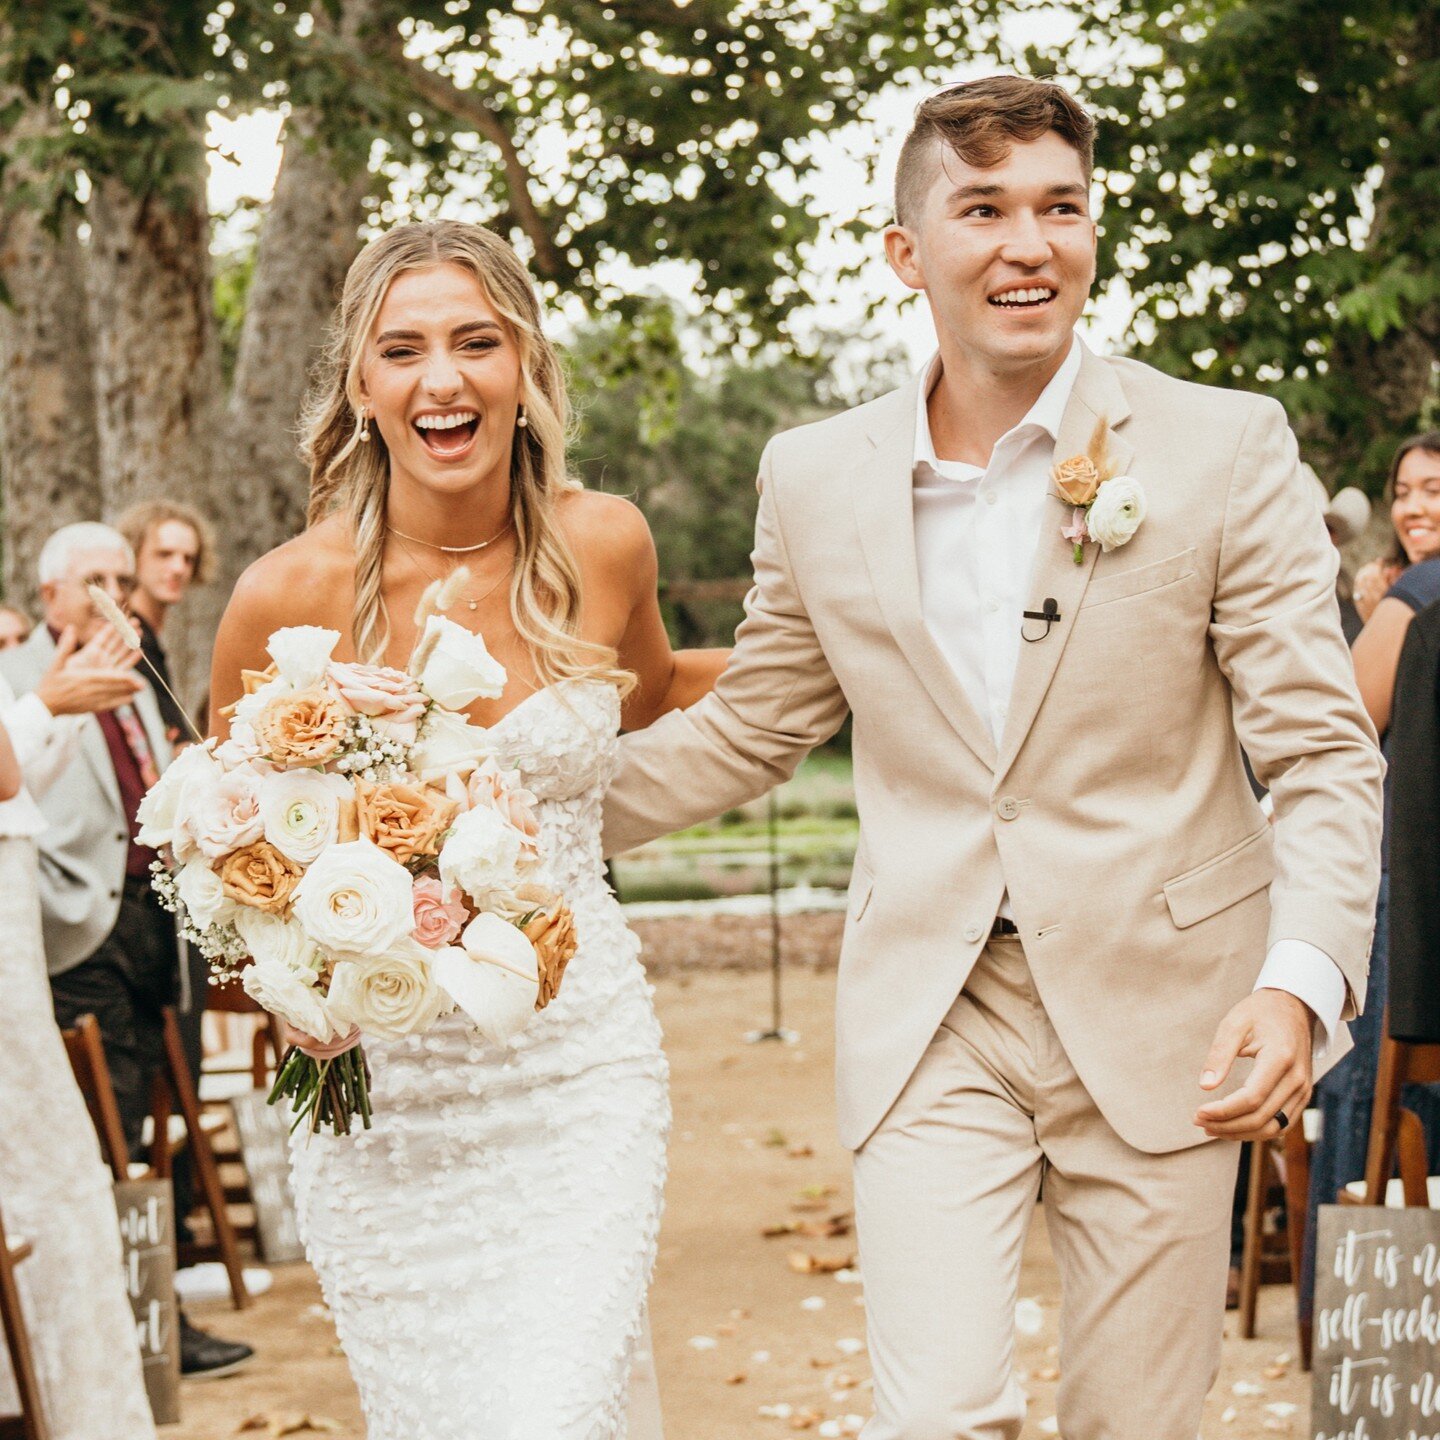 @josiahhaas30 &amp; @mckenziehaas1 may every moment of your marriage sparkle as bright as your smiles on your wedding day!
.
.
.
Couple | @josiahhaas30 &amp; @mckenziehaas1
Photography | @_benjasmith_ @vibras.studios
Wedding Venue | @monseratewinery 